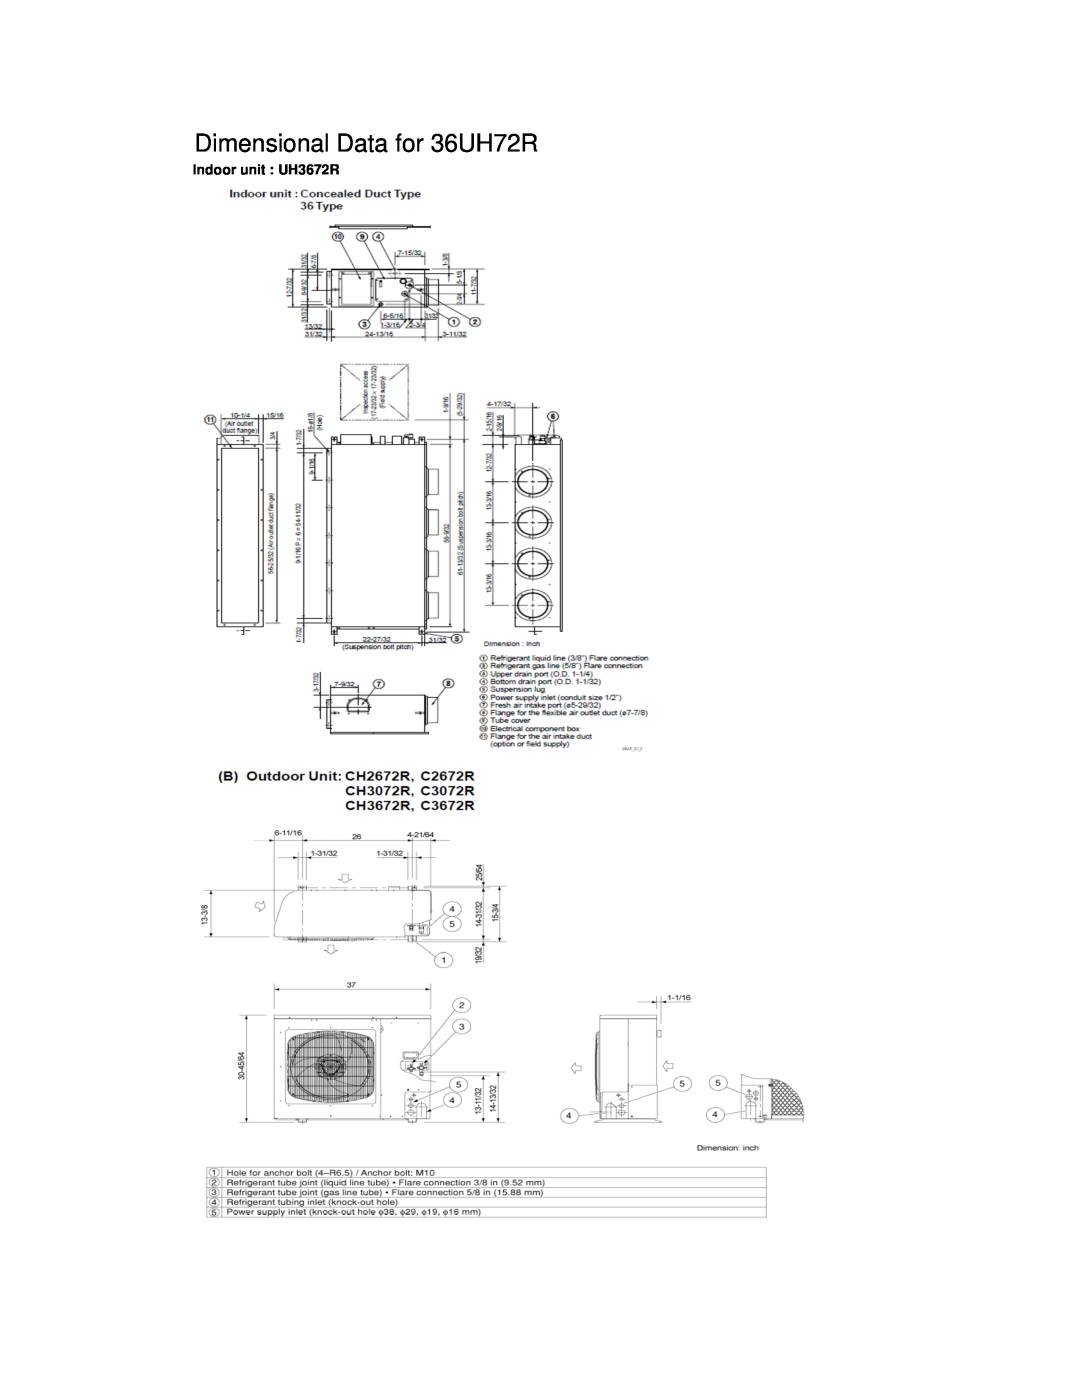 Sanyo manual Dimensional Data for 36UH72R, Indoor unit UH3672R 